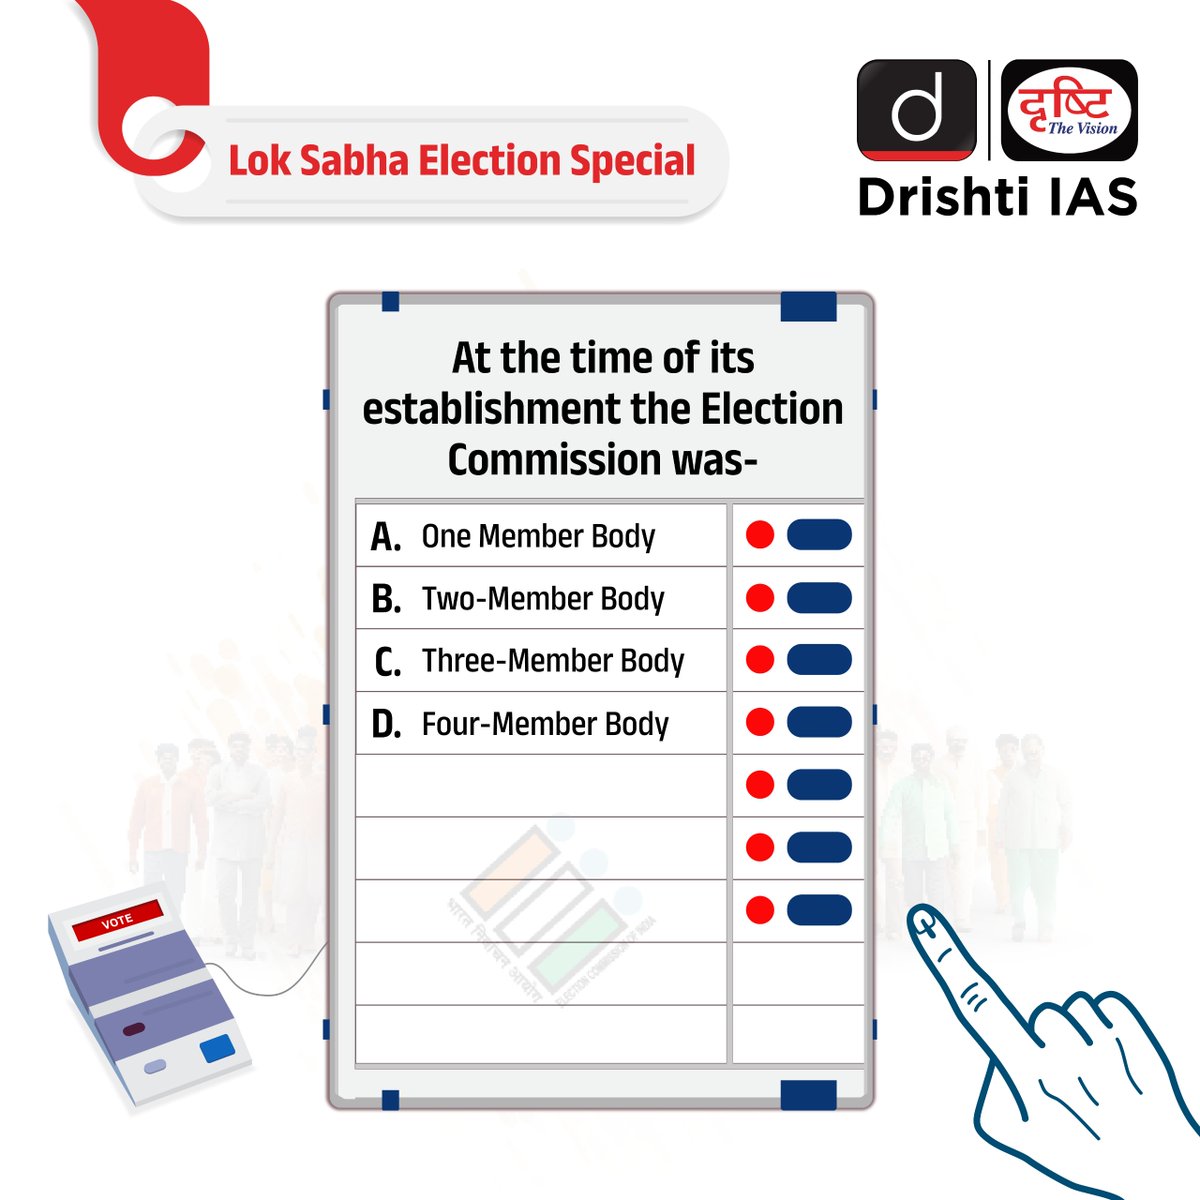 Share your answer to the above question about the #ElectionCommission of #India in the comment section. #LokSabha #Election #LokSabhaElection2024 #Voting #Vote #Assembly #Prelims2024 #UPSC #UPSC2024 #IAS #GeneralStudies #Preparation #Practice #DrishtiIAS #DrishtiIASEnglish